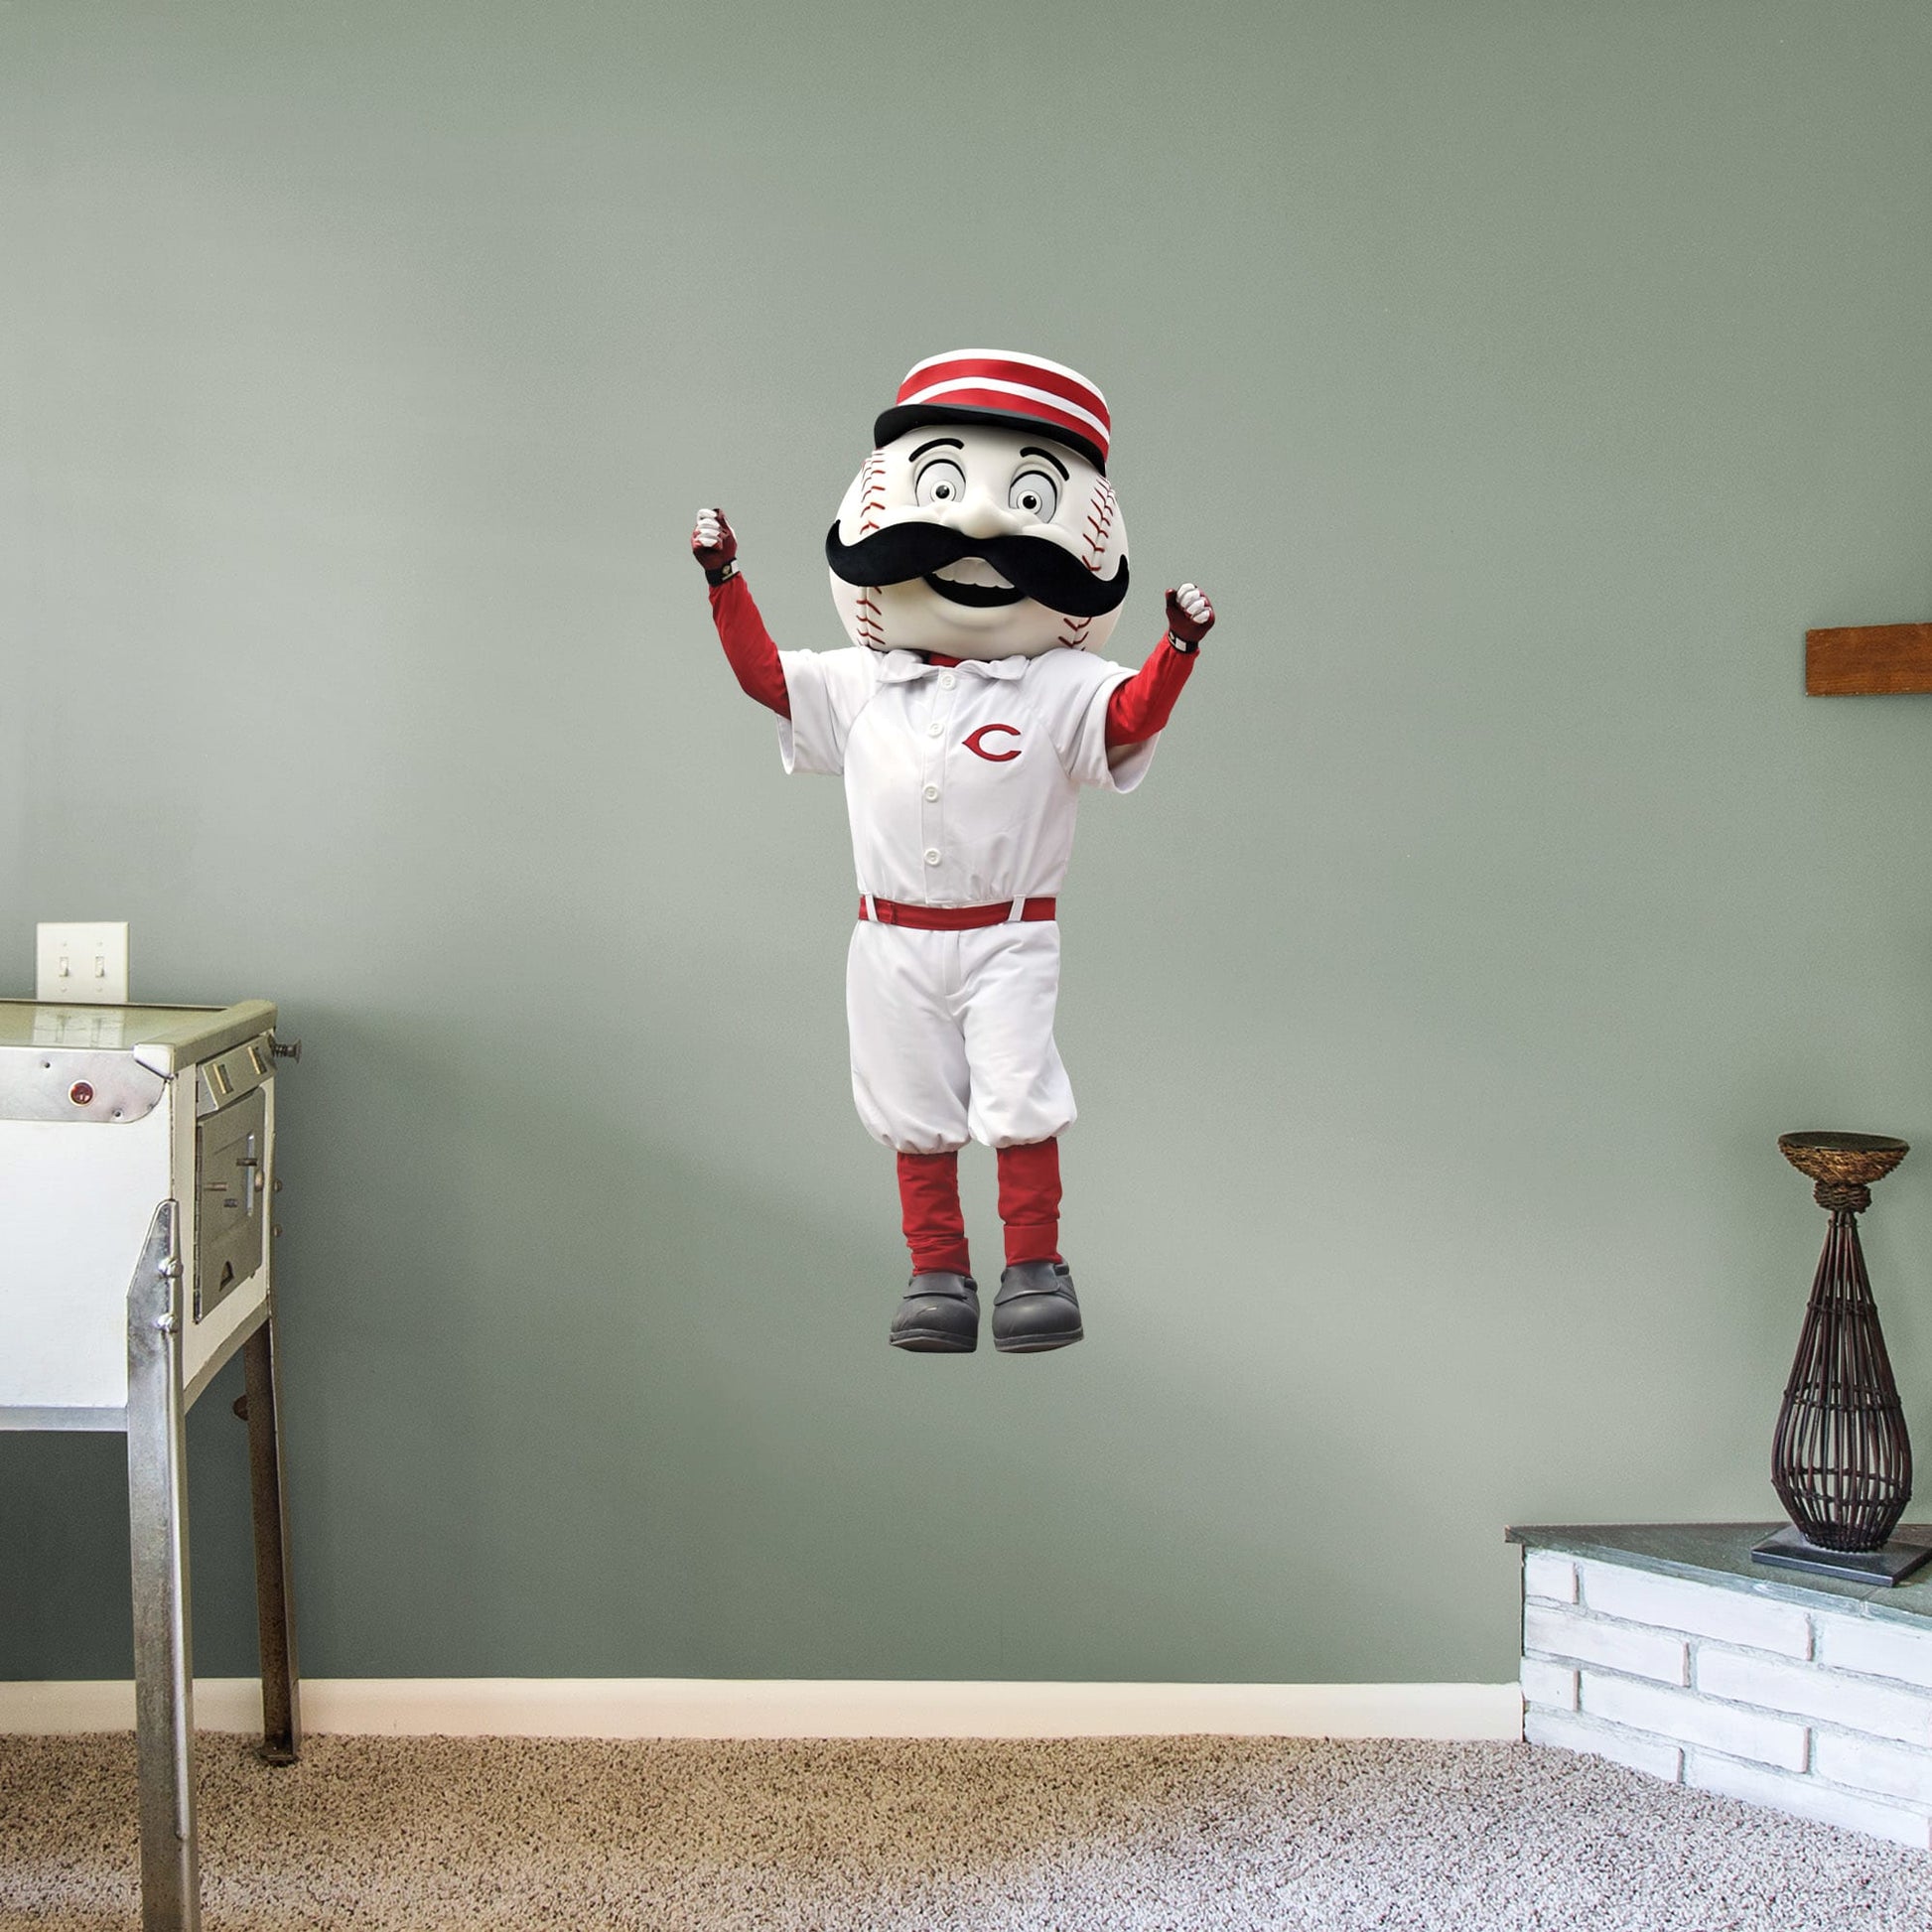 Giant Mascot + 2 Decals (27"W x 51"H)